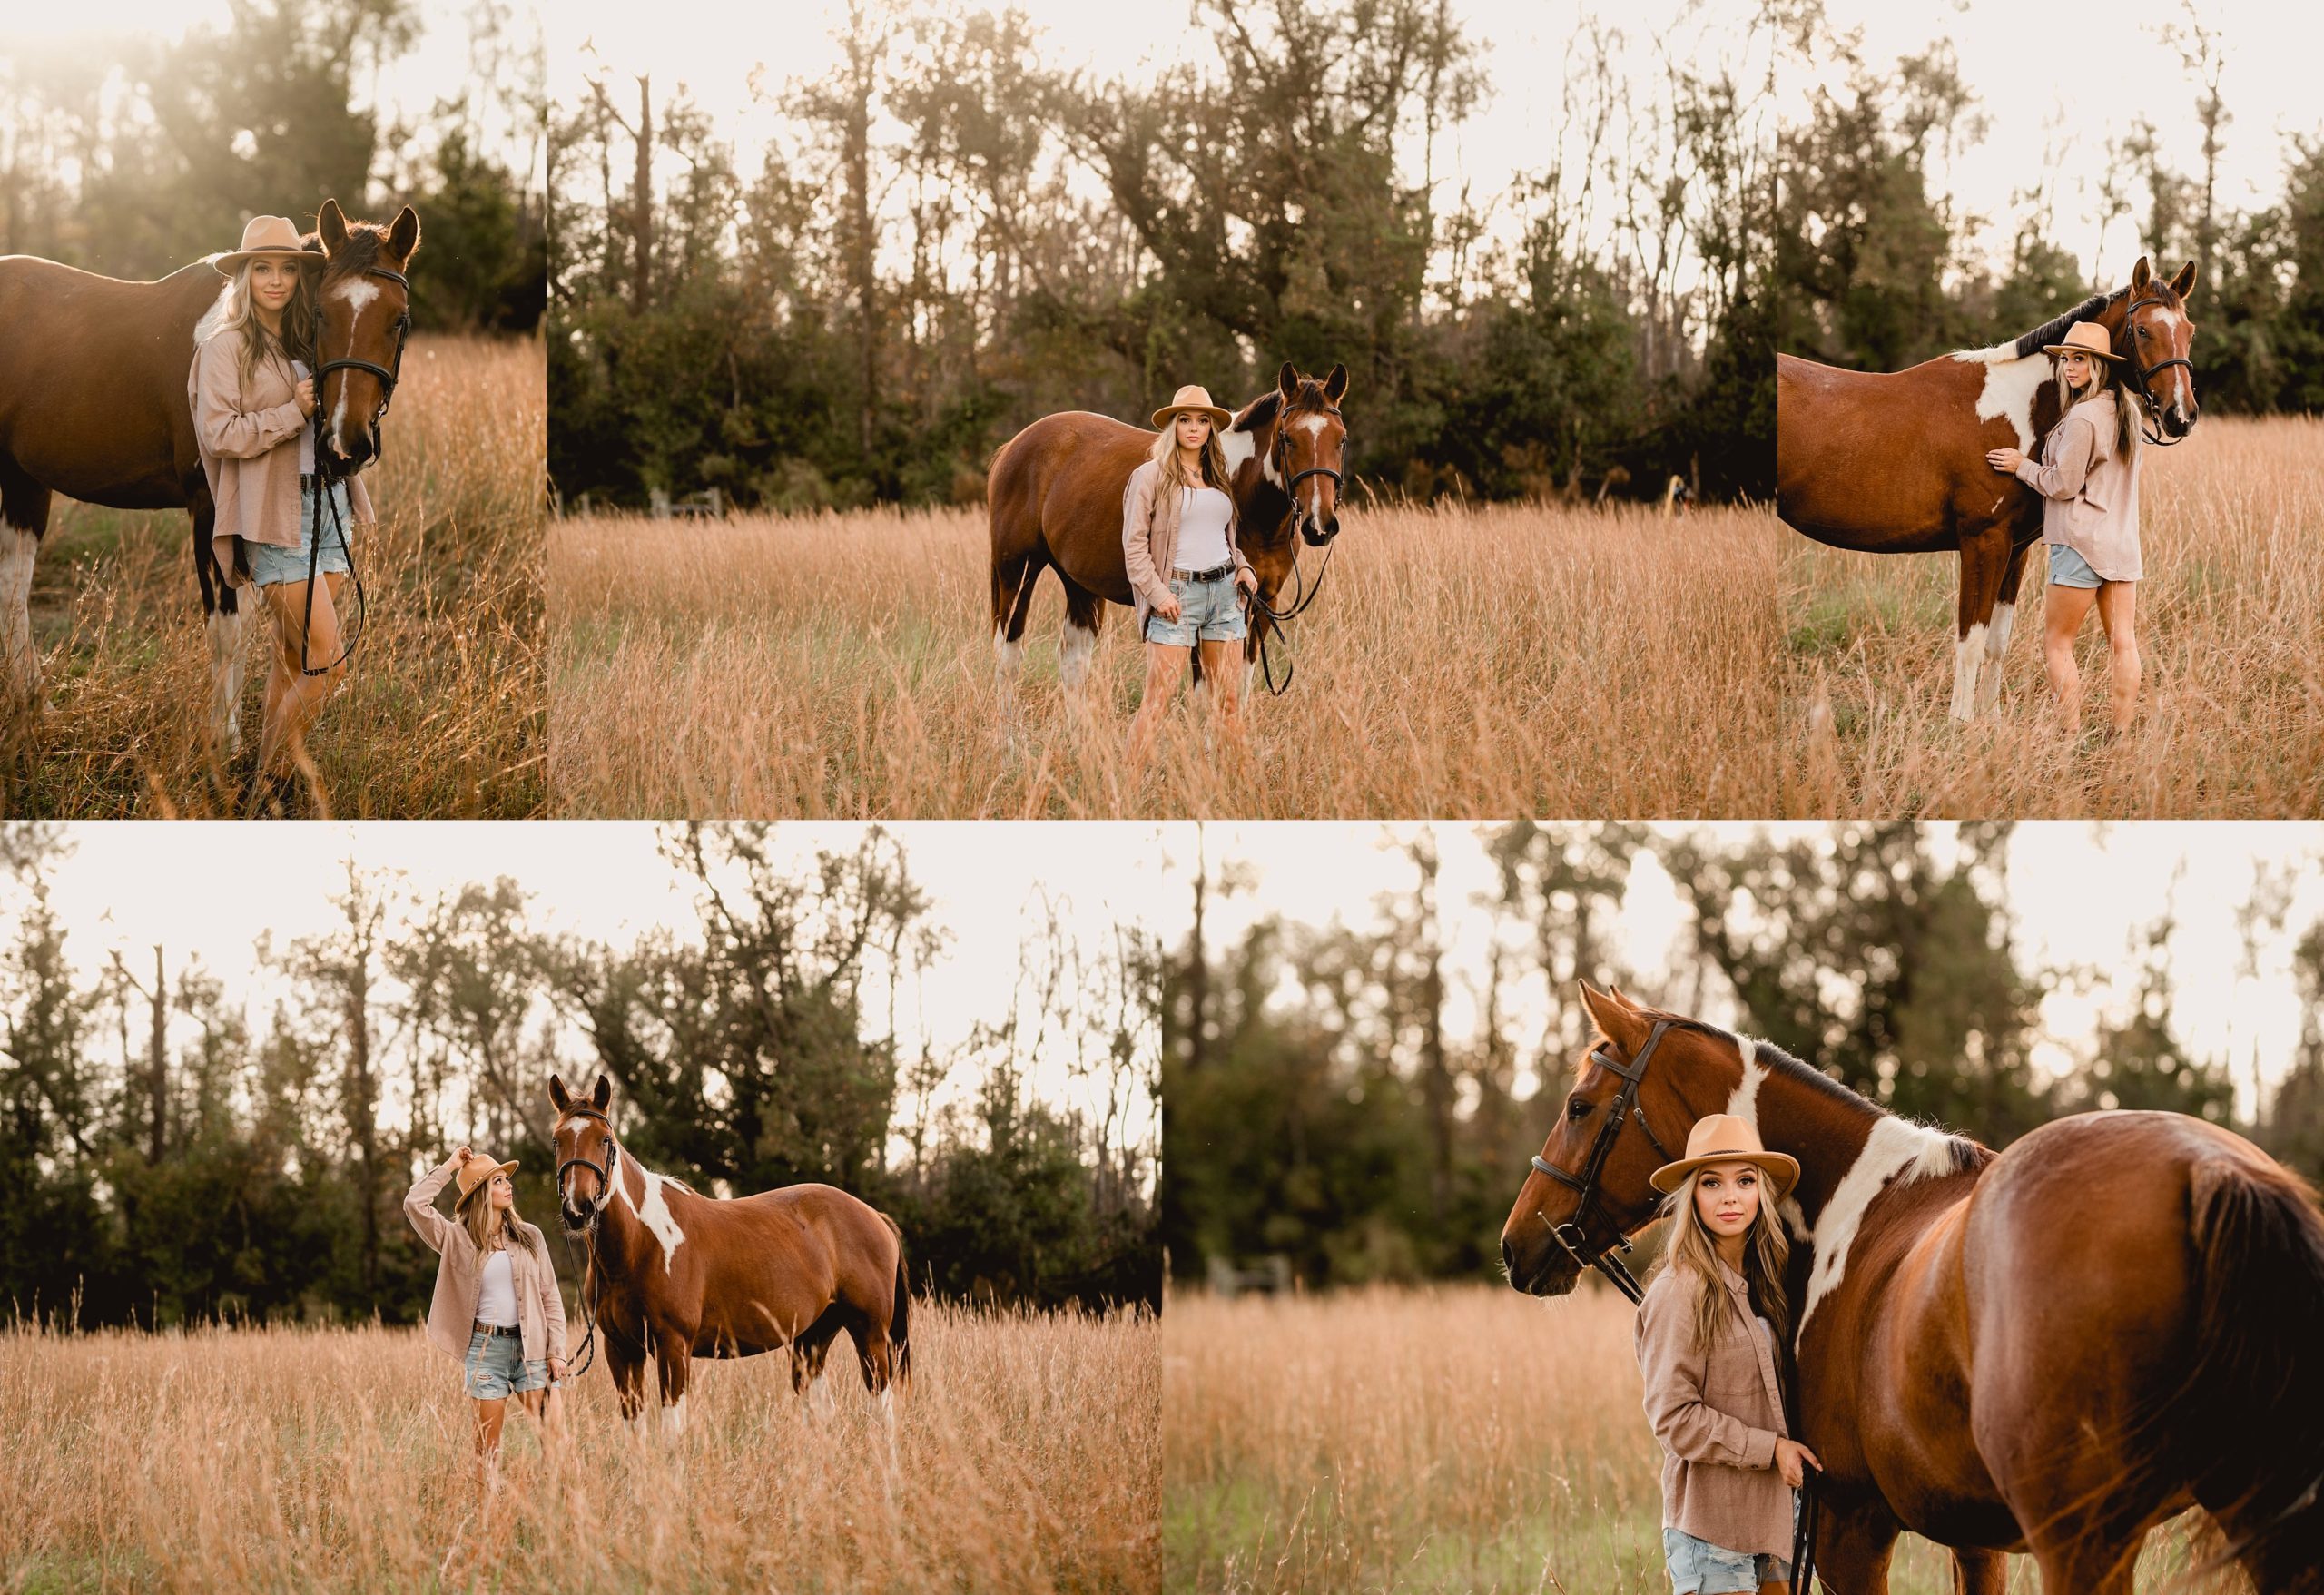 Posing ideas for horse and rider pictures in tall grass field during winter.